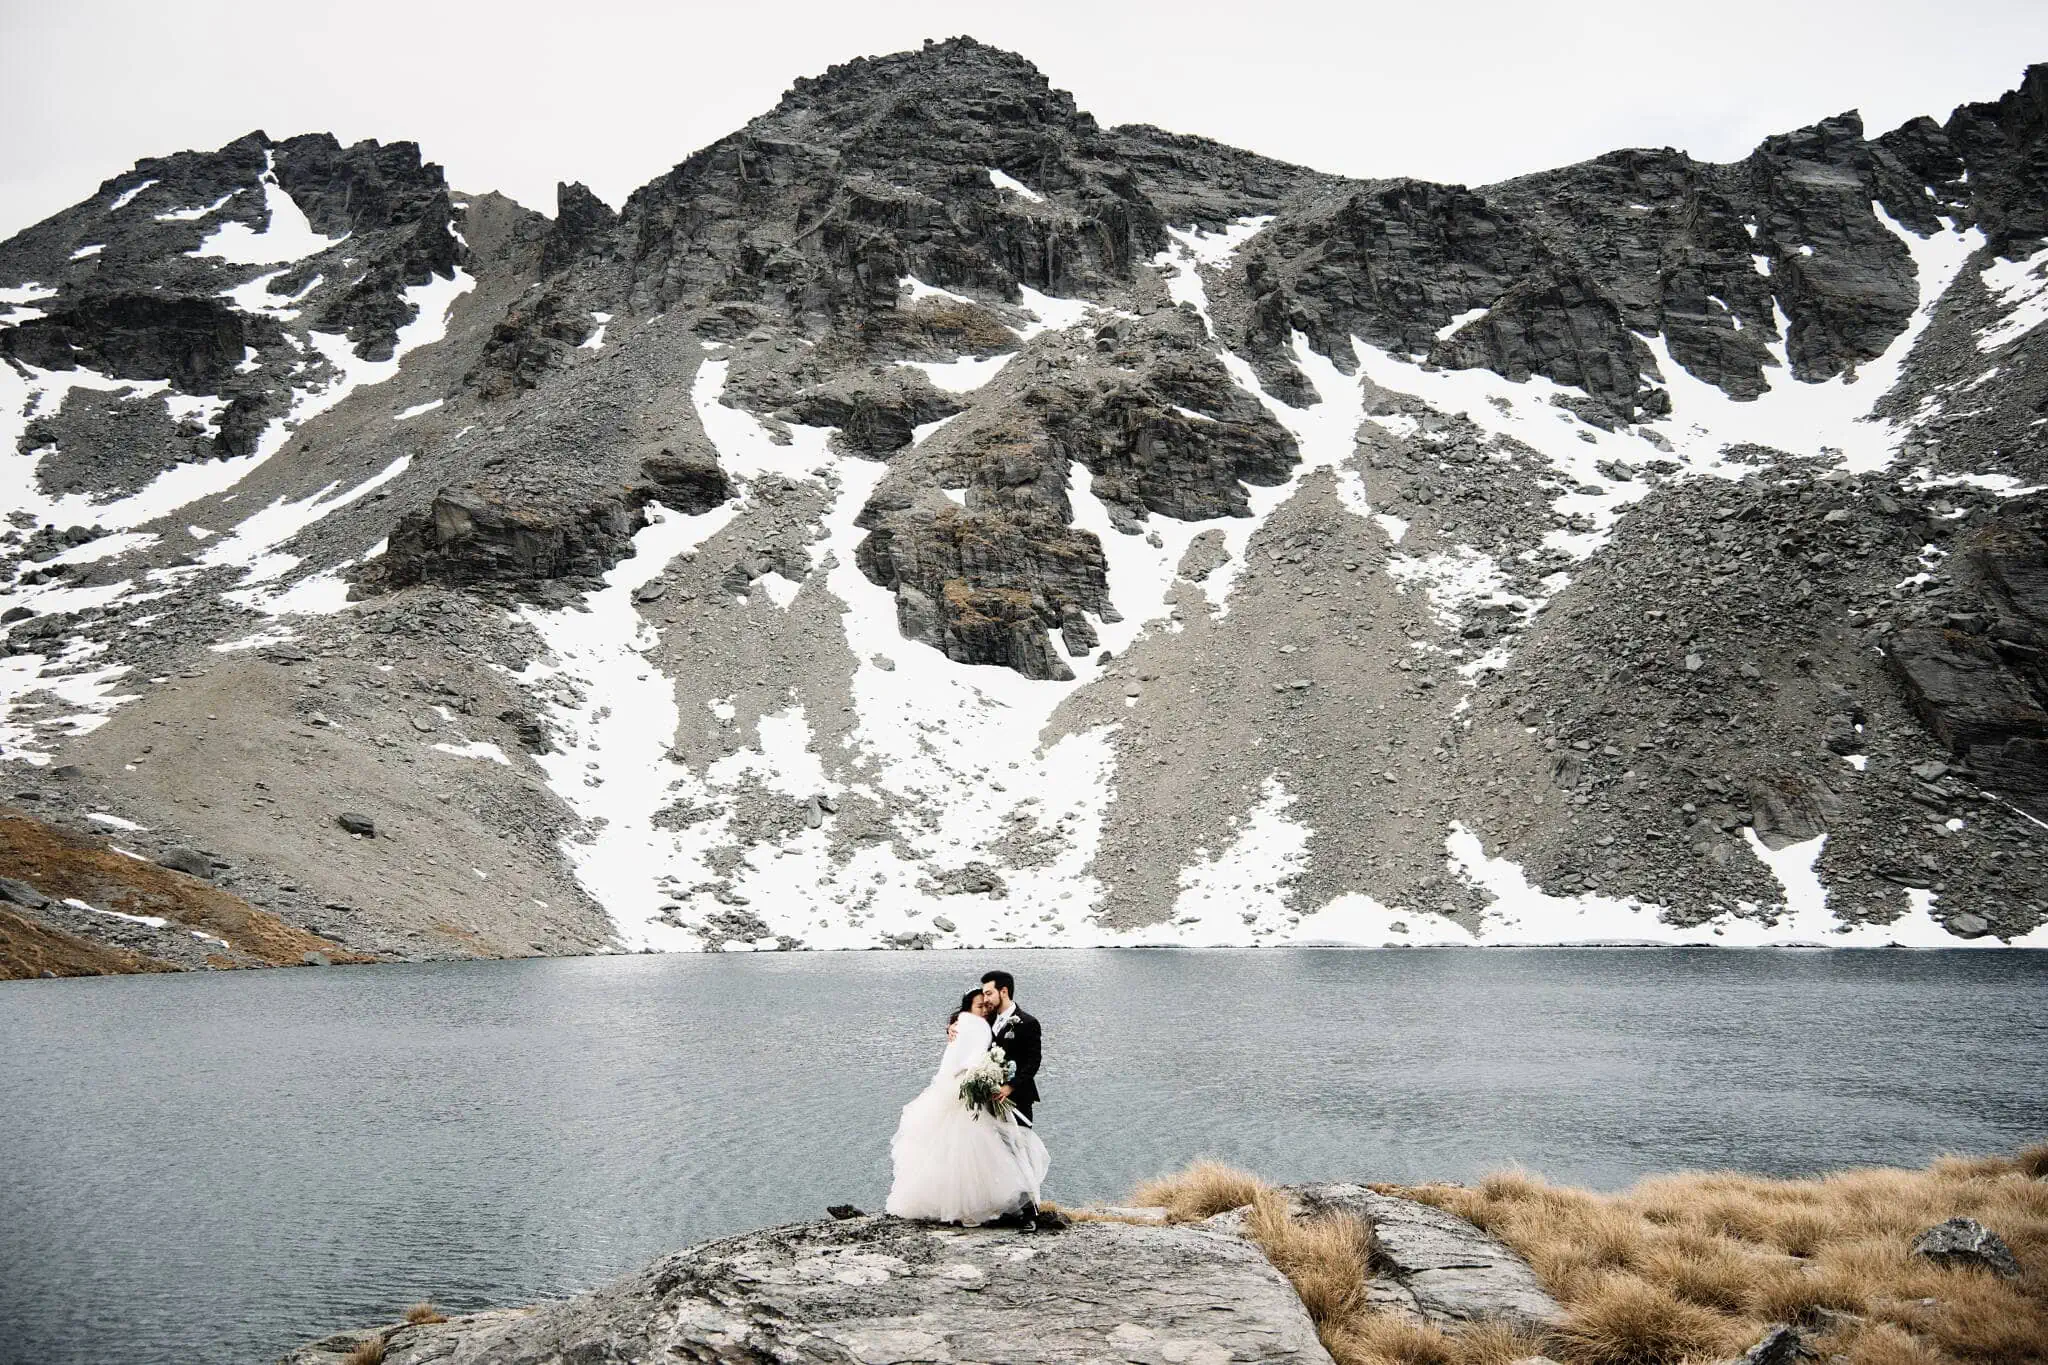 Carlos and Wanzhu's intimate elopement wedding in front of a lake at Cecil Peak.